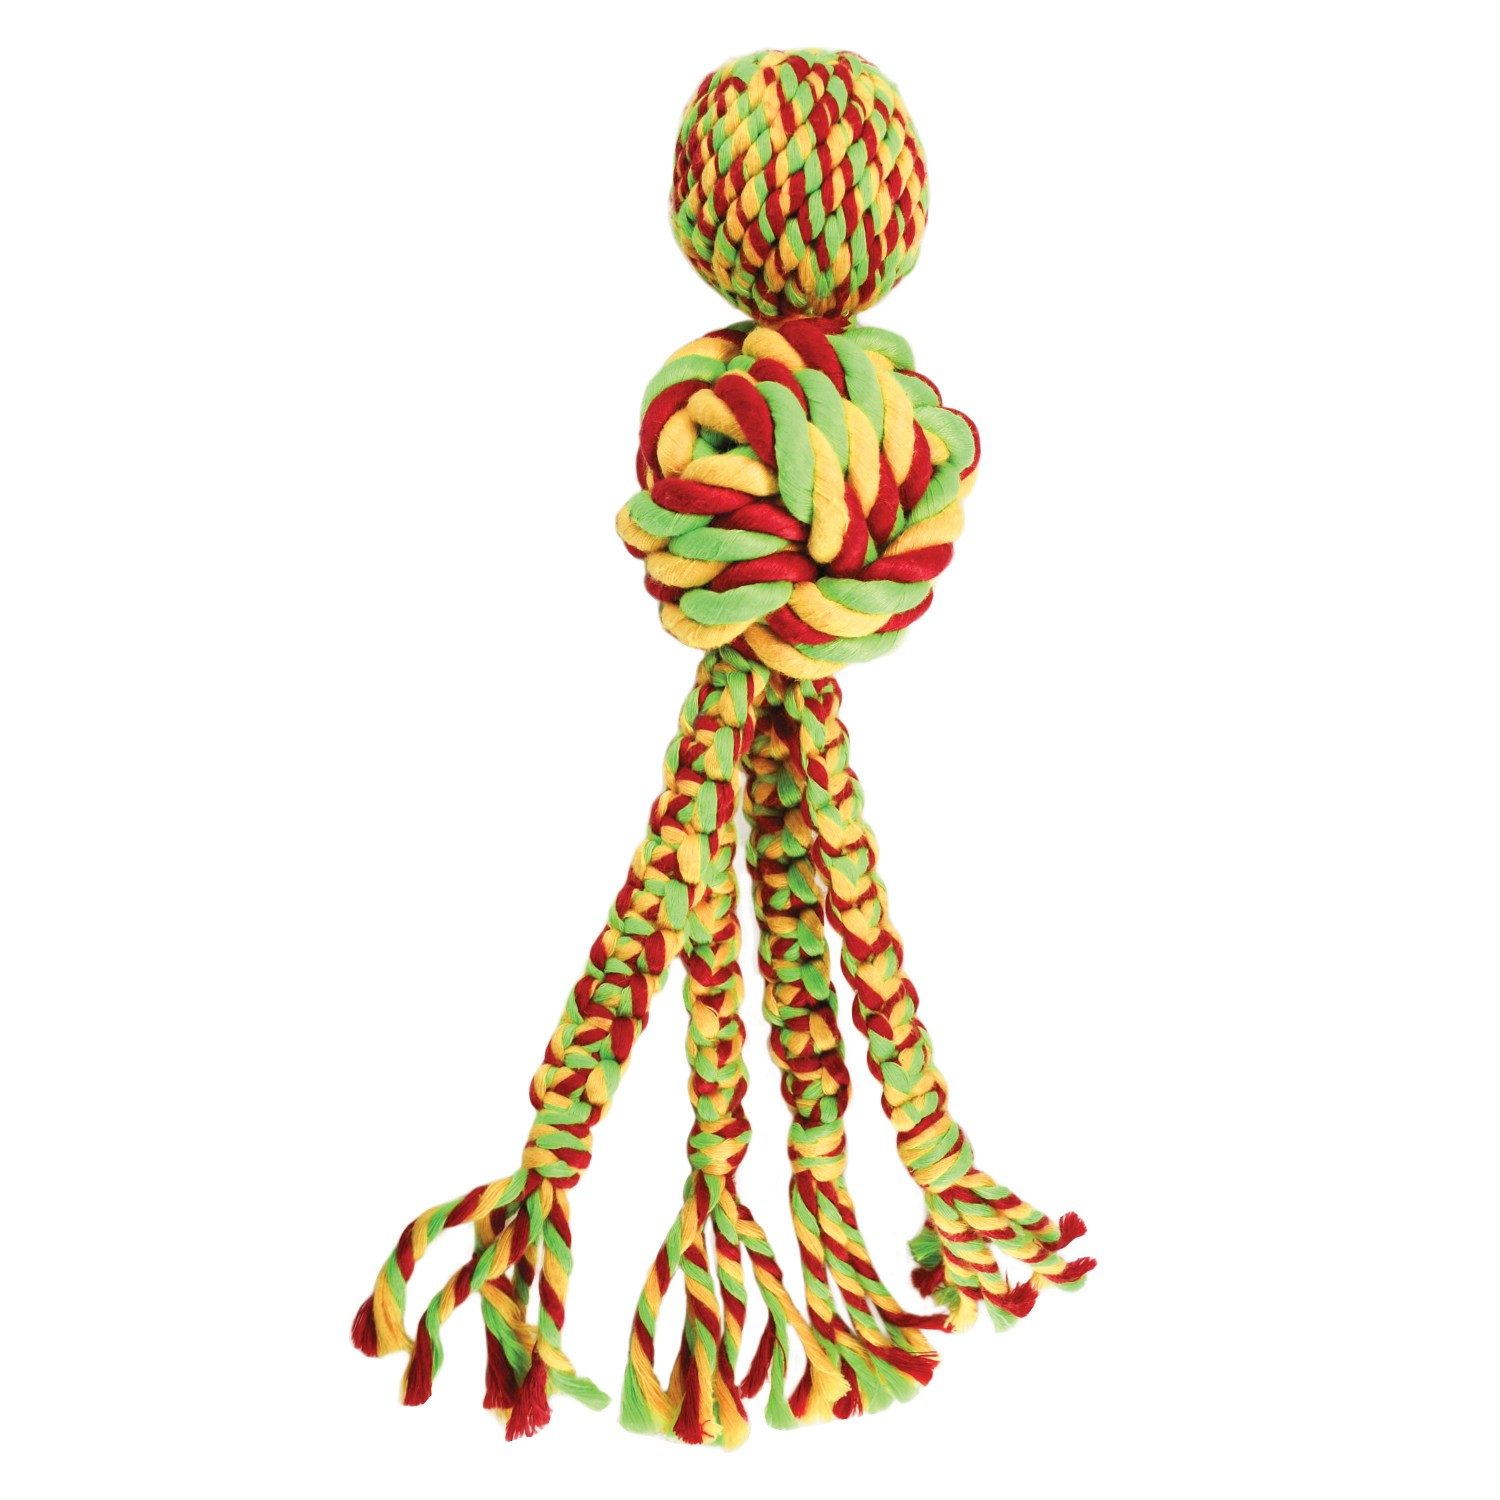 Jouet pour chien KONG Wubba Weaves With Rope 